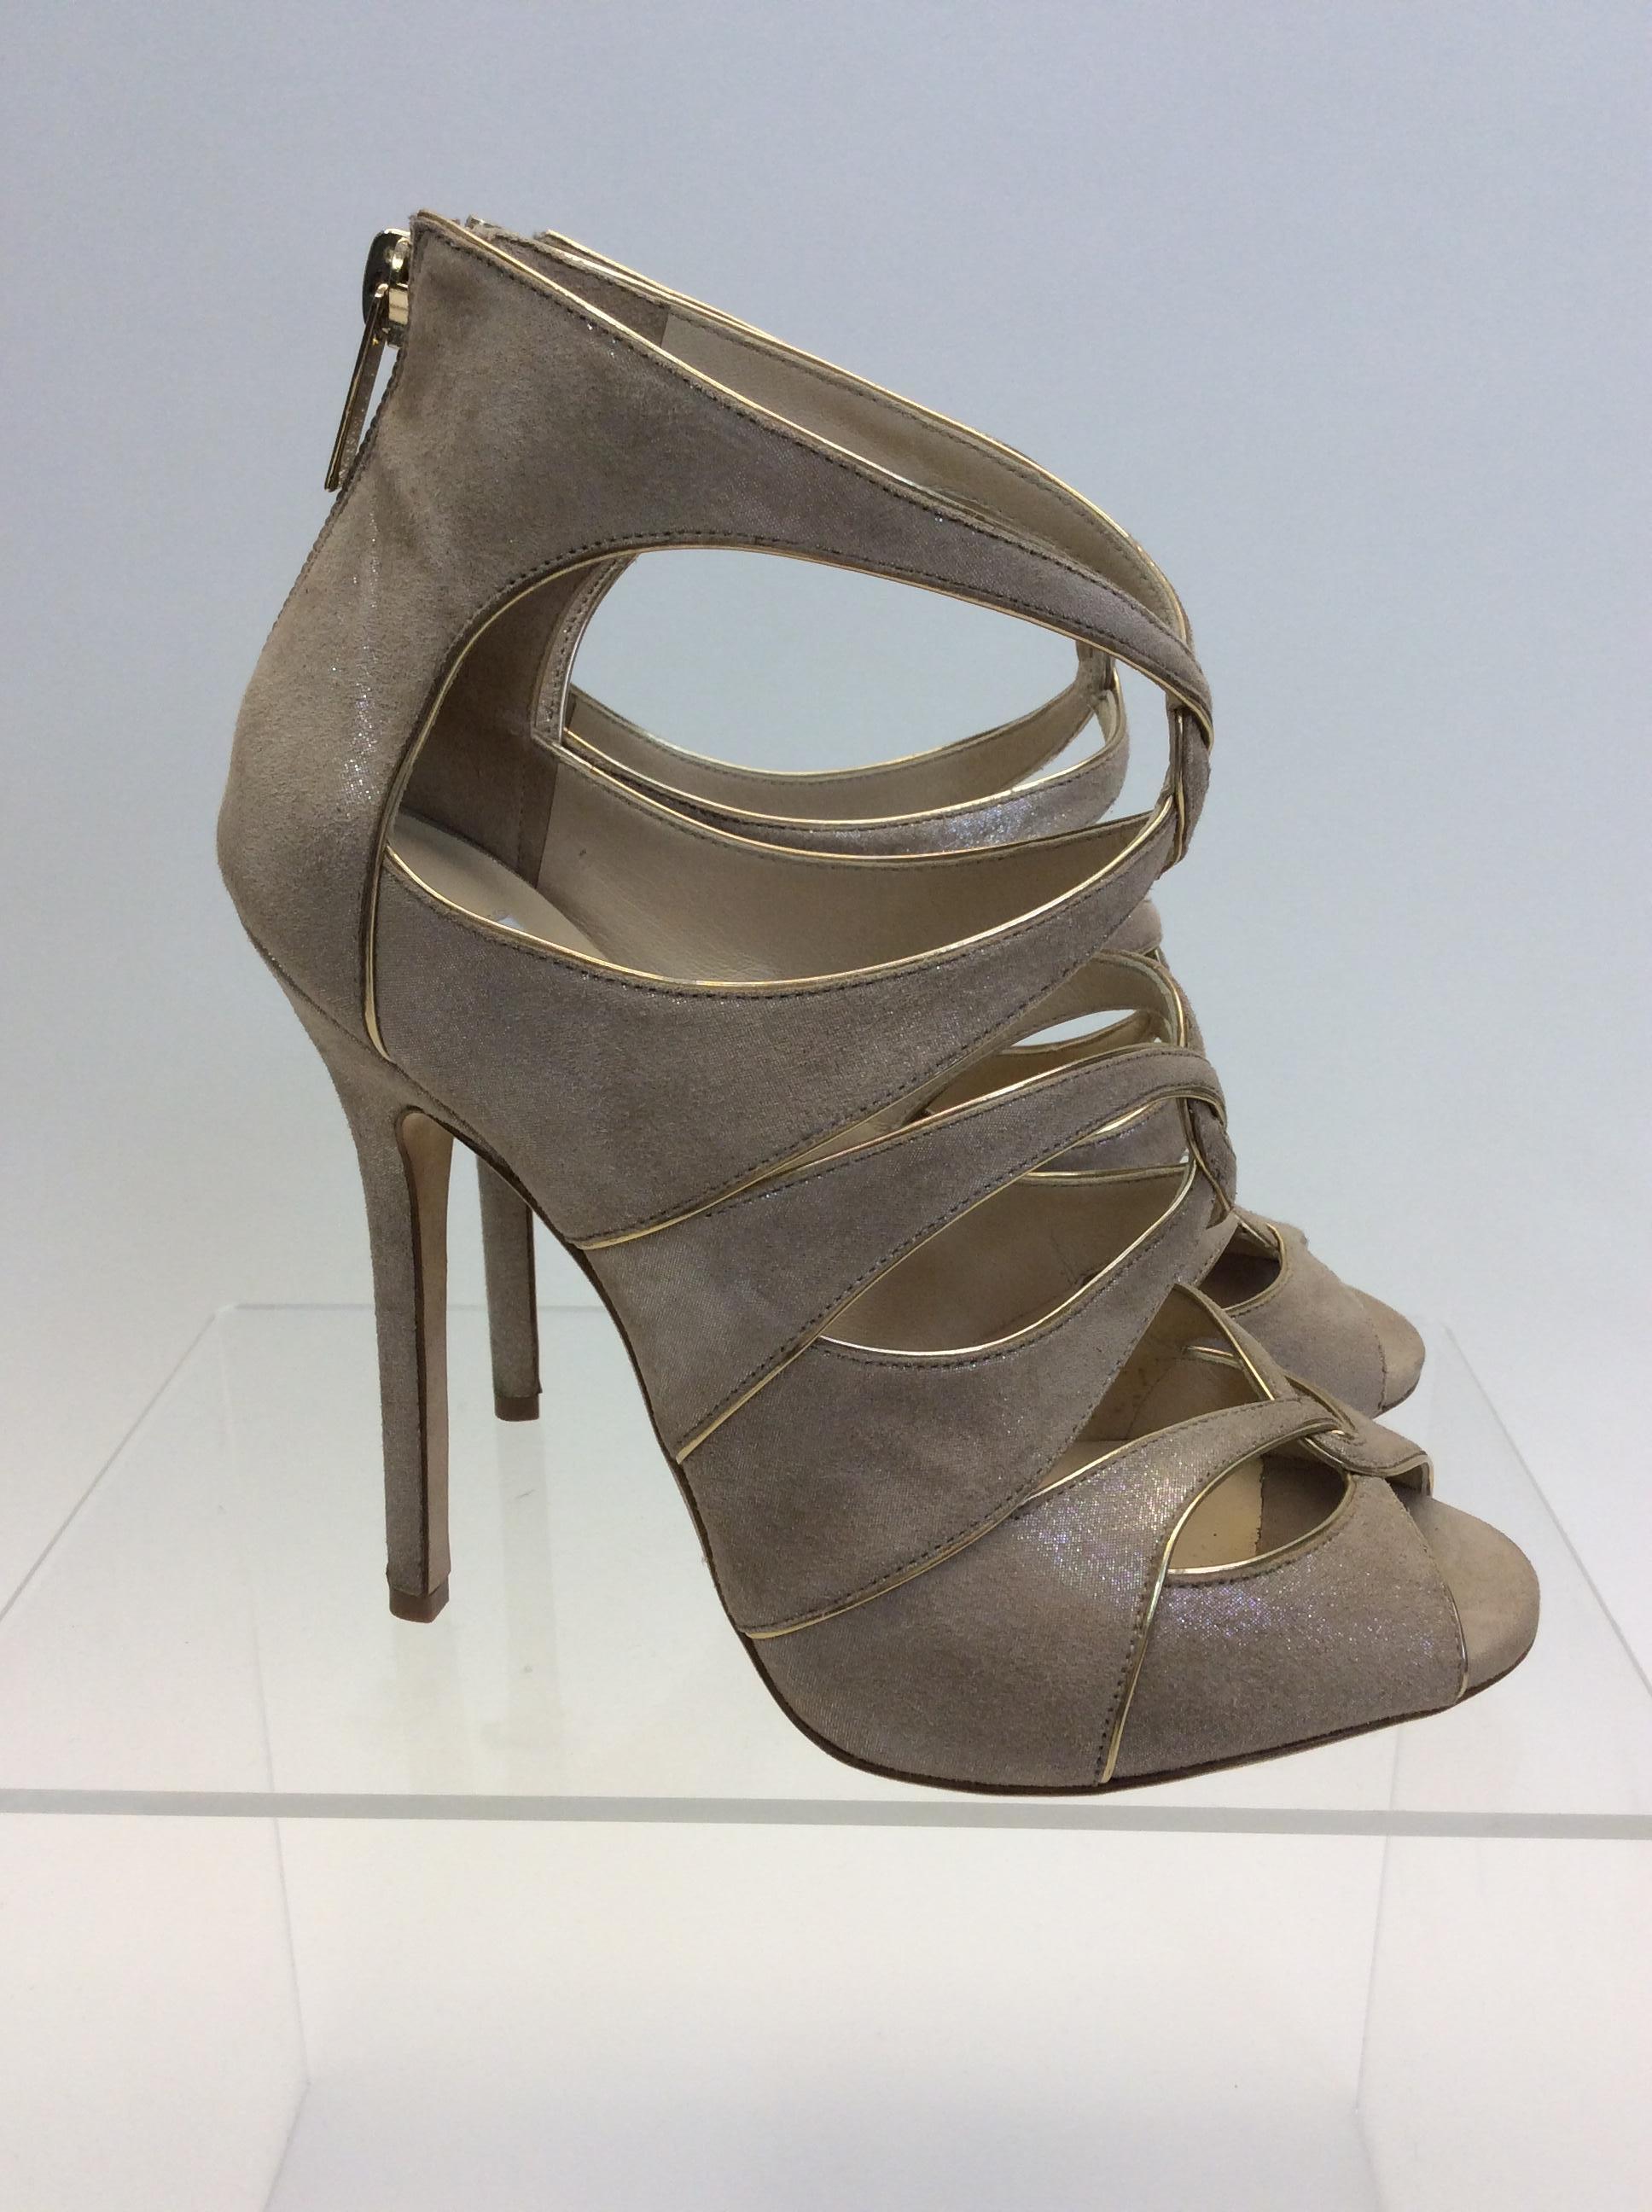 Women's Jimmy Choo Gold and Tan Heels For Sale